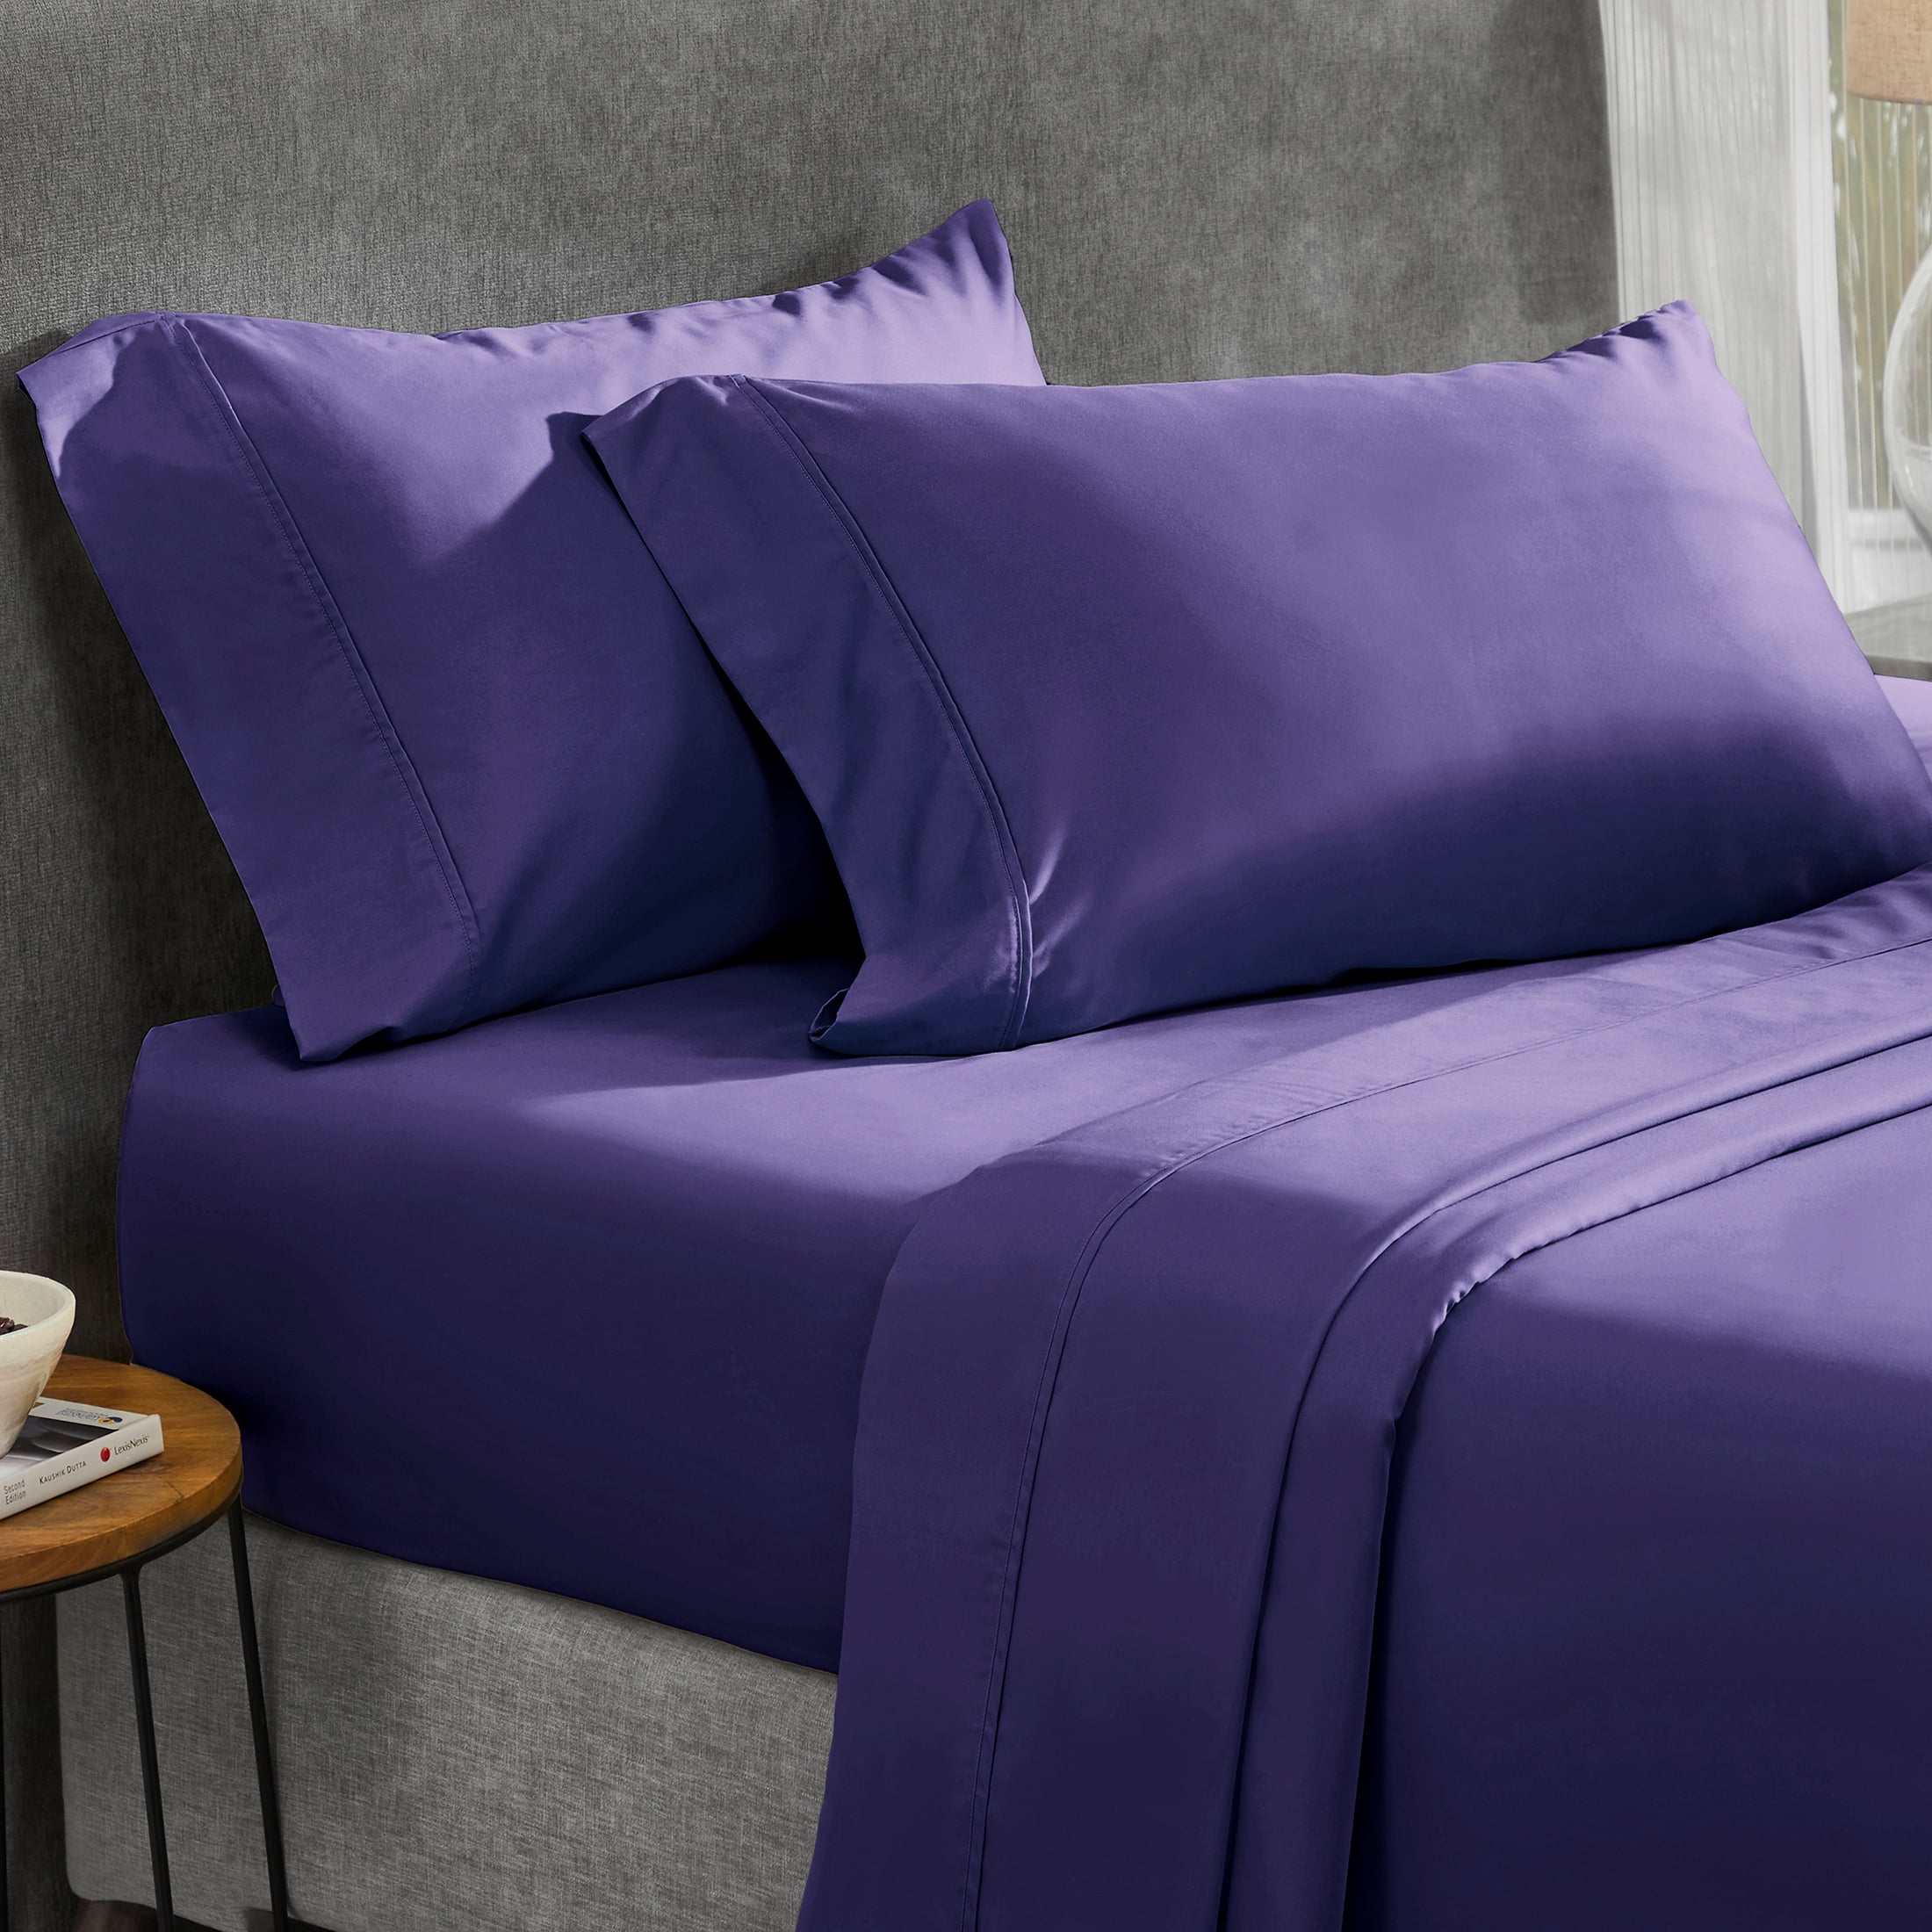 Details about   1200 Thread Count Egyptian Cotton Choose Bedding Item US Sizes Purple Striped 